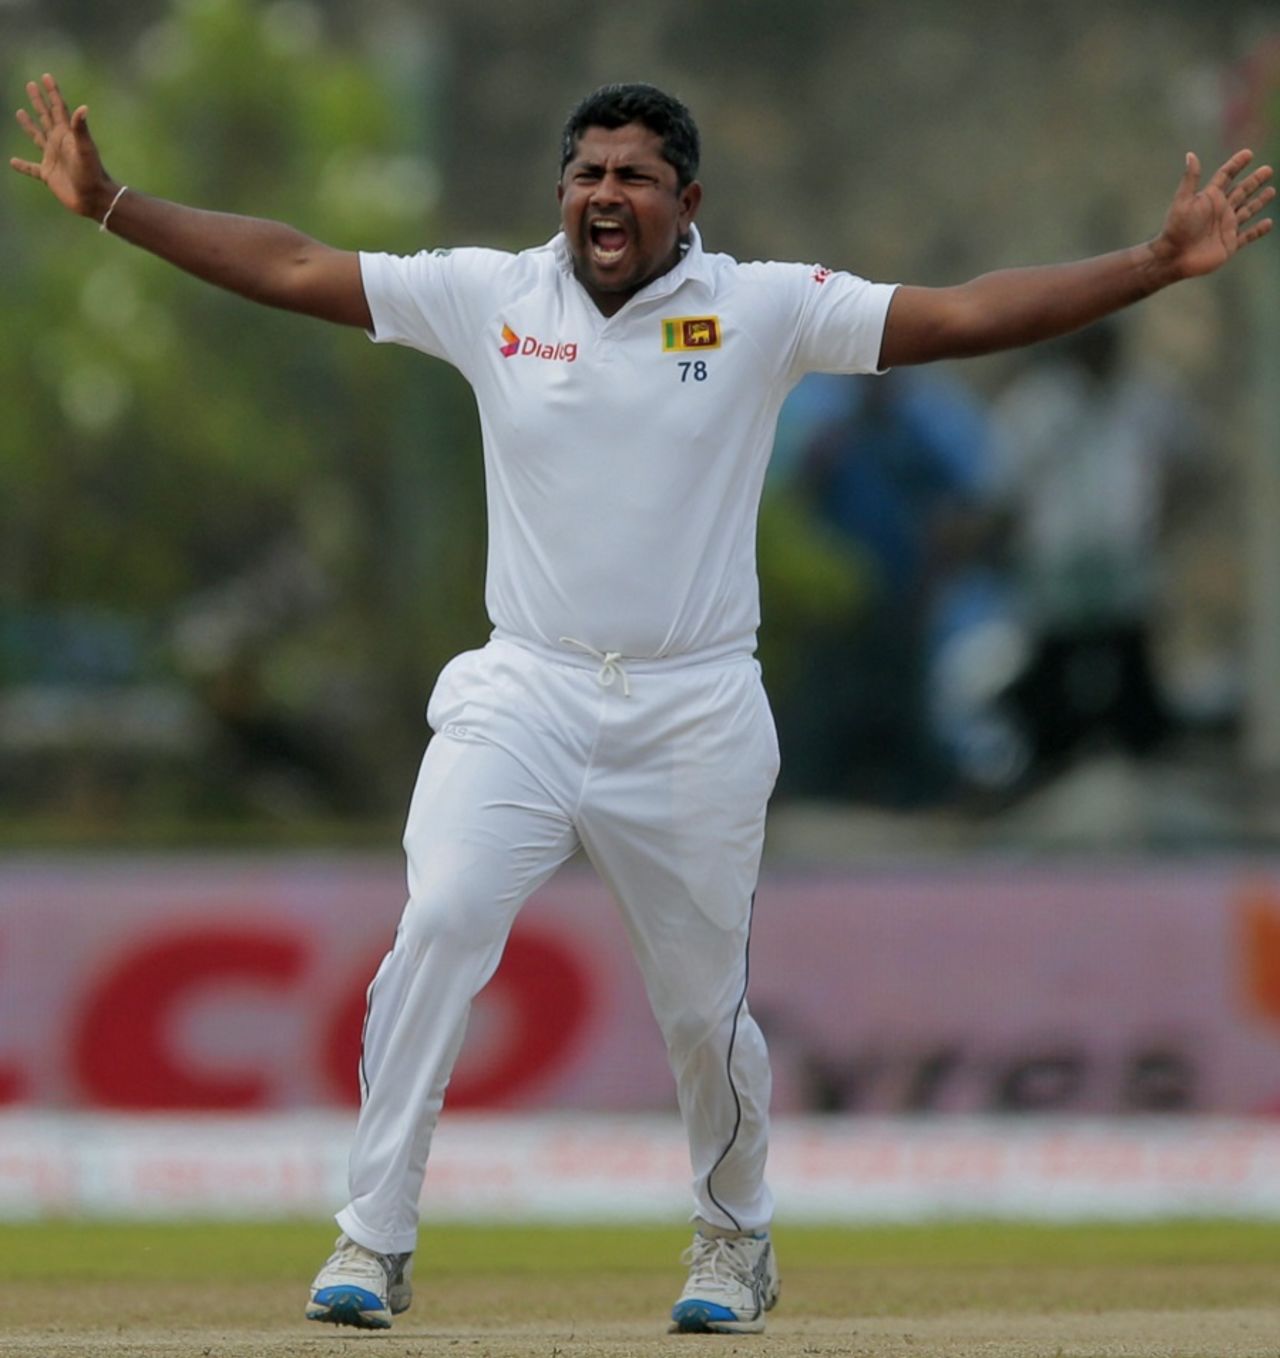 Rangana Herath appeals unsuccessfully for lbw against Shikhar Dhawan, Sri Lanka v India, 1st Test, Galle, 2nd day, August 13, 2015